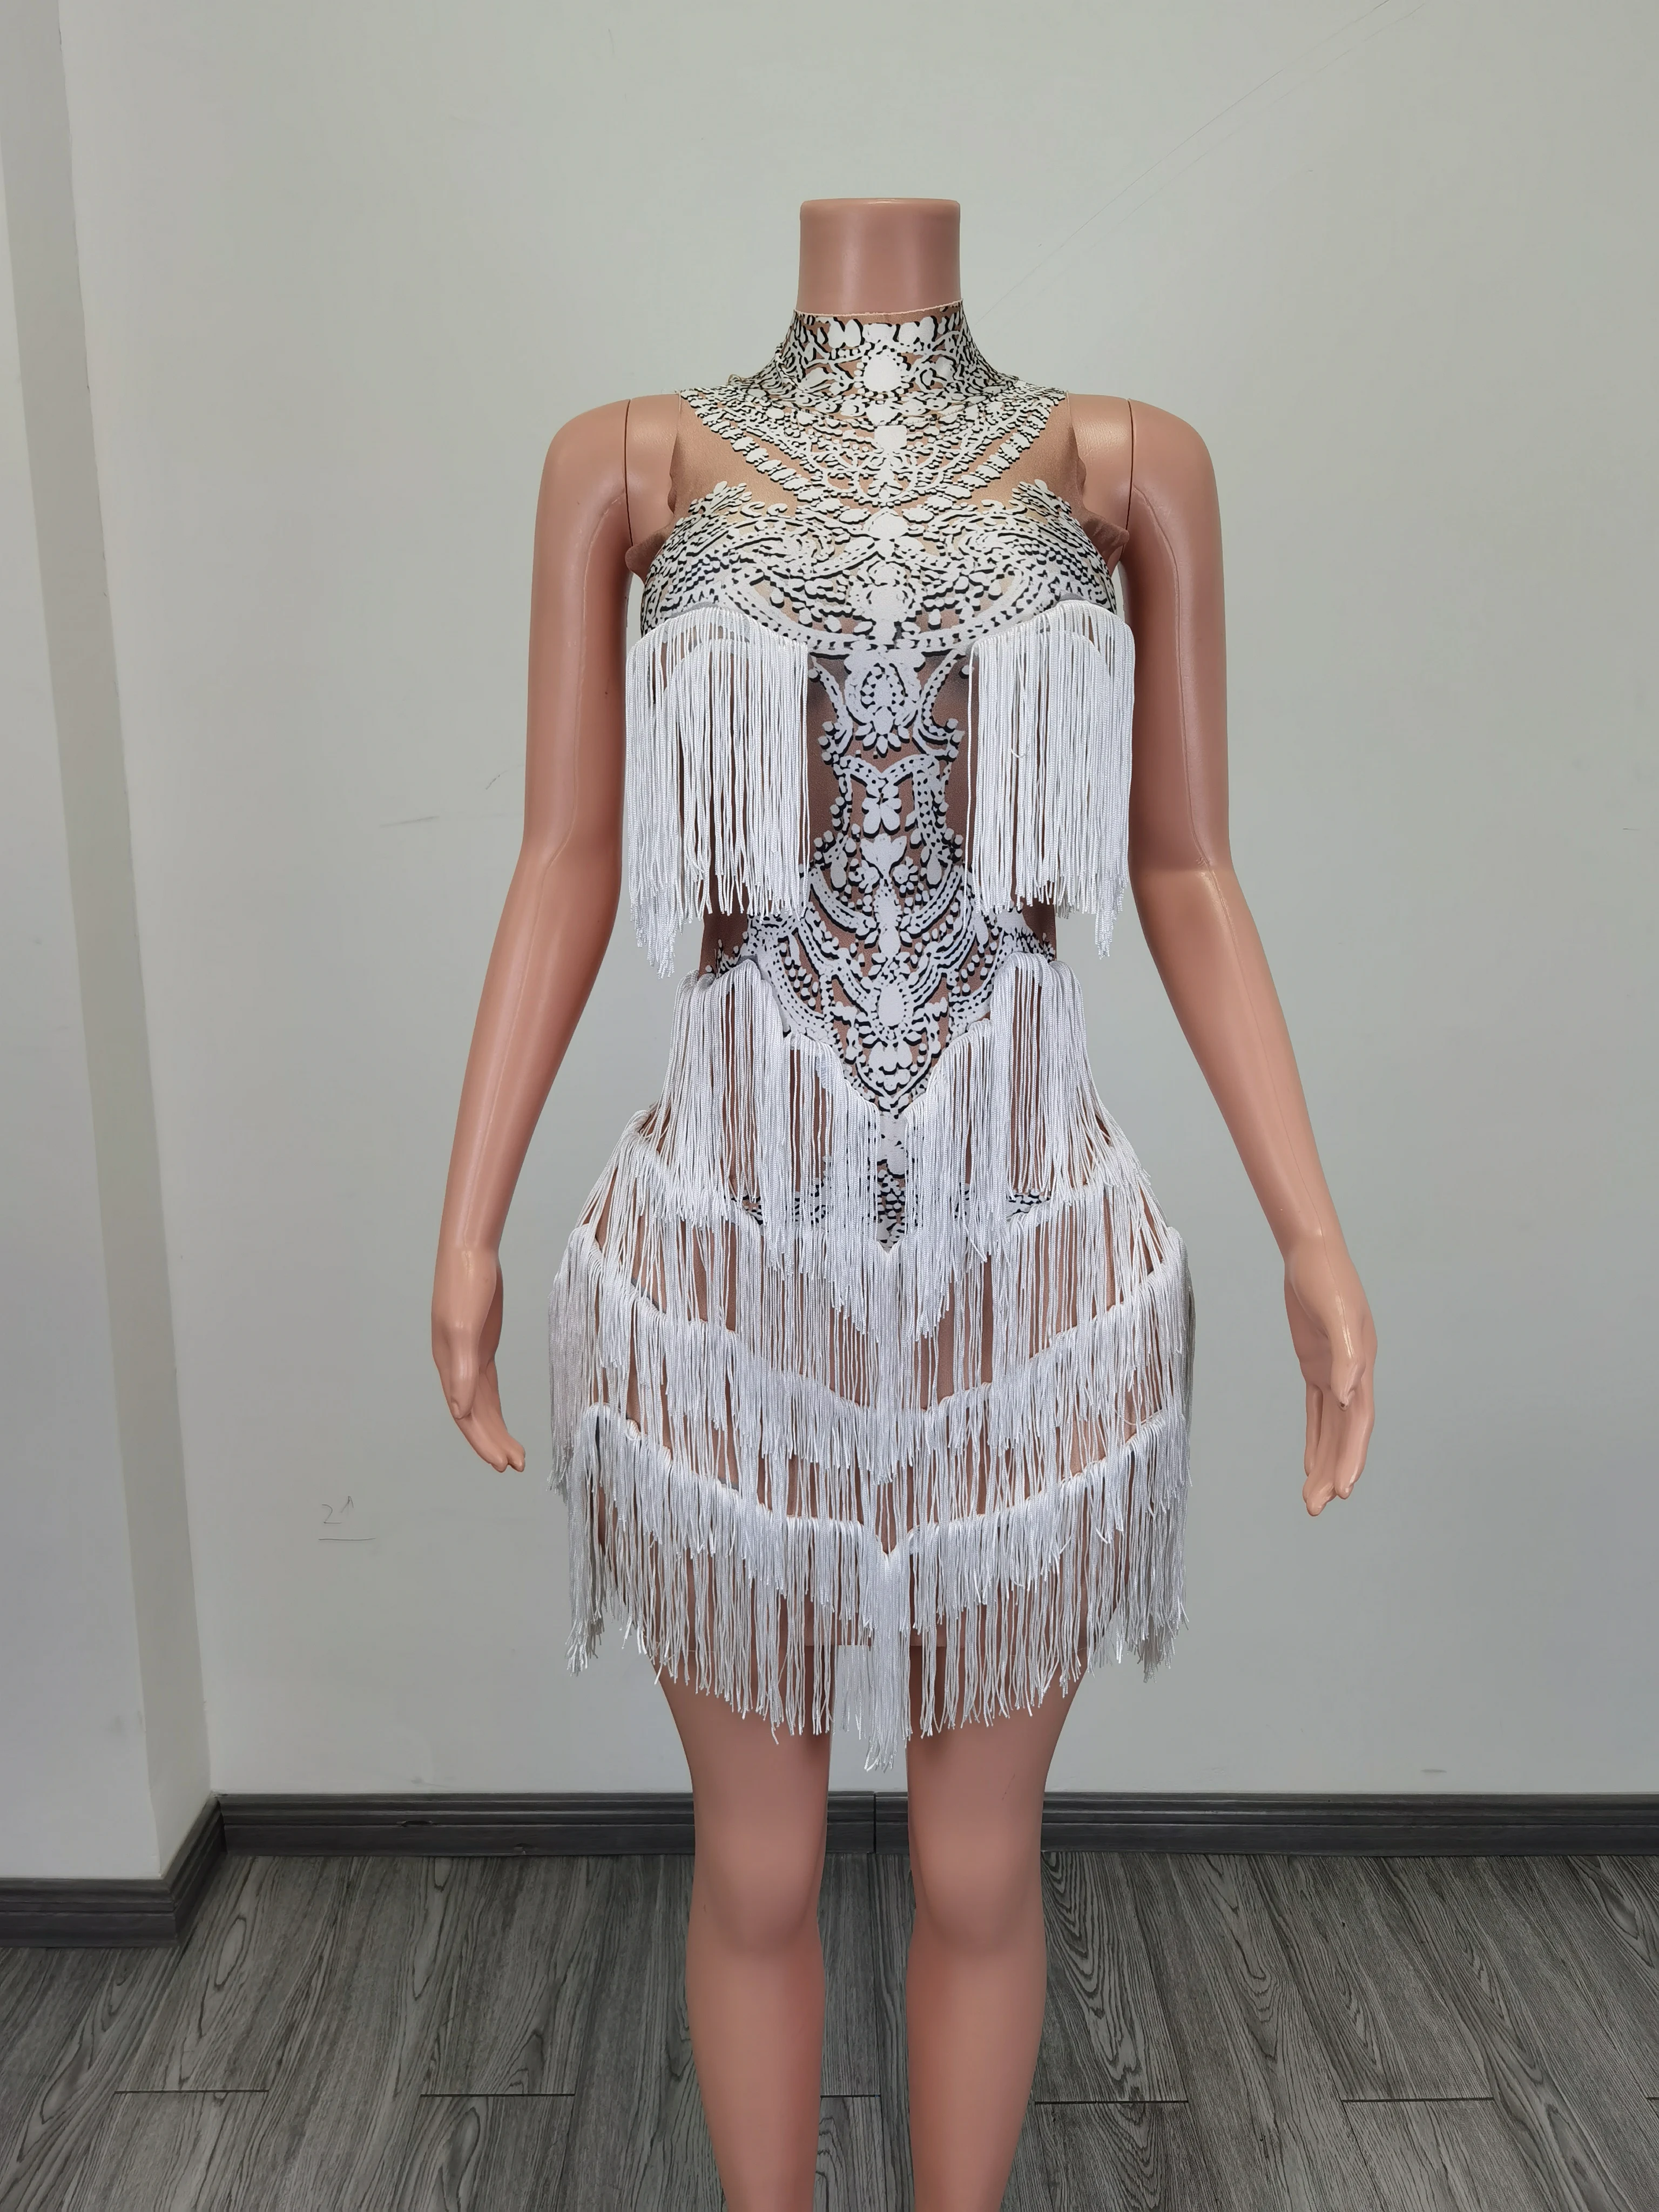 

Sexy White Fringes Dress Stretch Sleeveless Outfit Stage Sexy Skinny Tassel Costumes Birthday Prom Show Women Stage Dance Wear